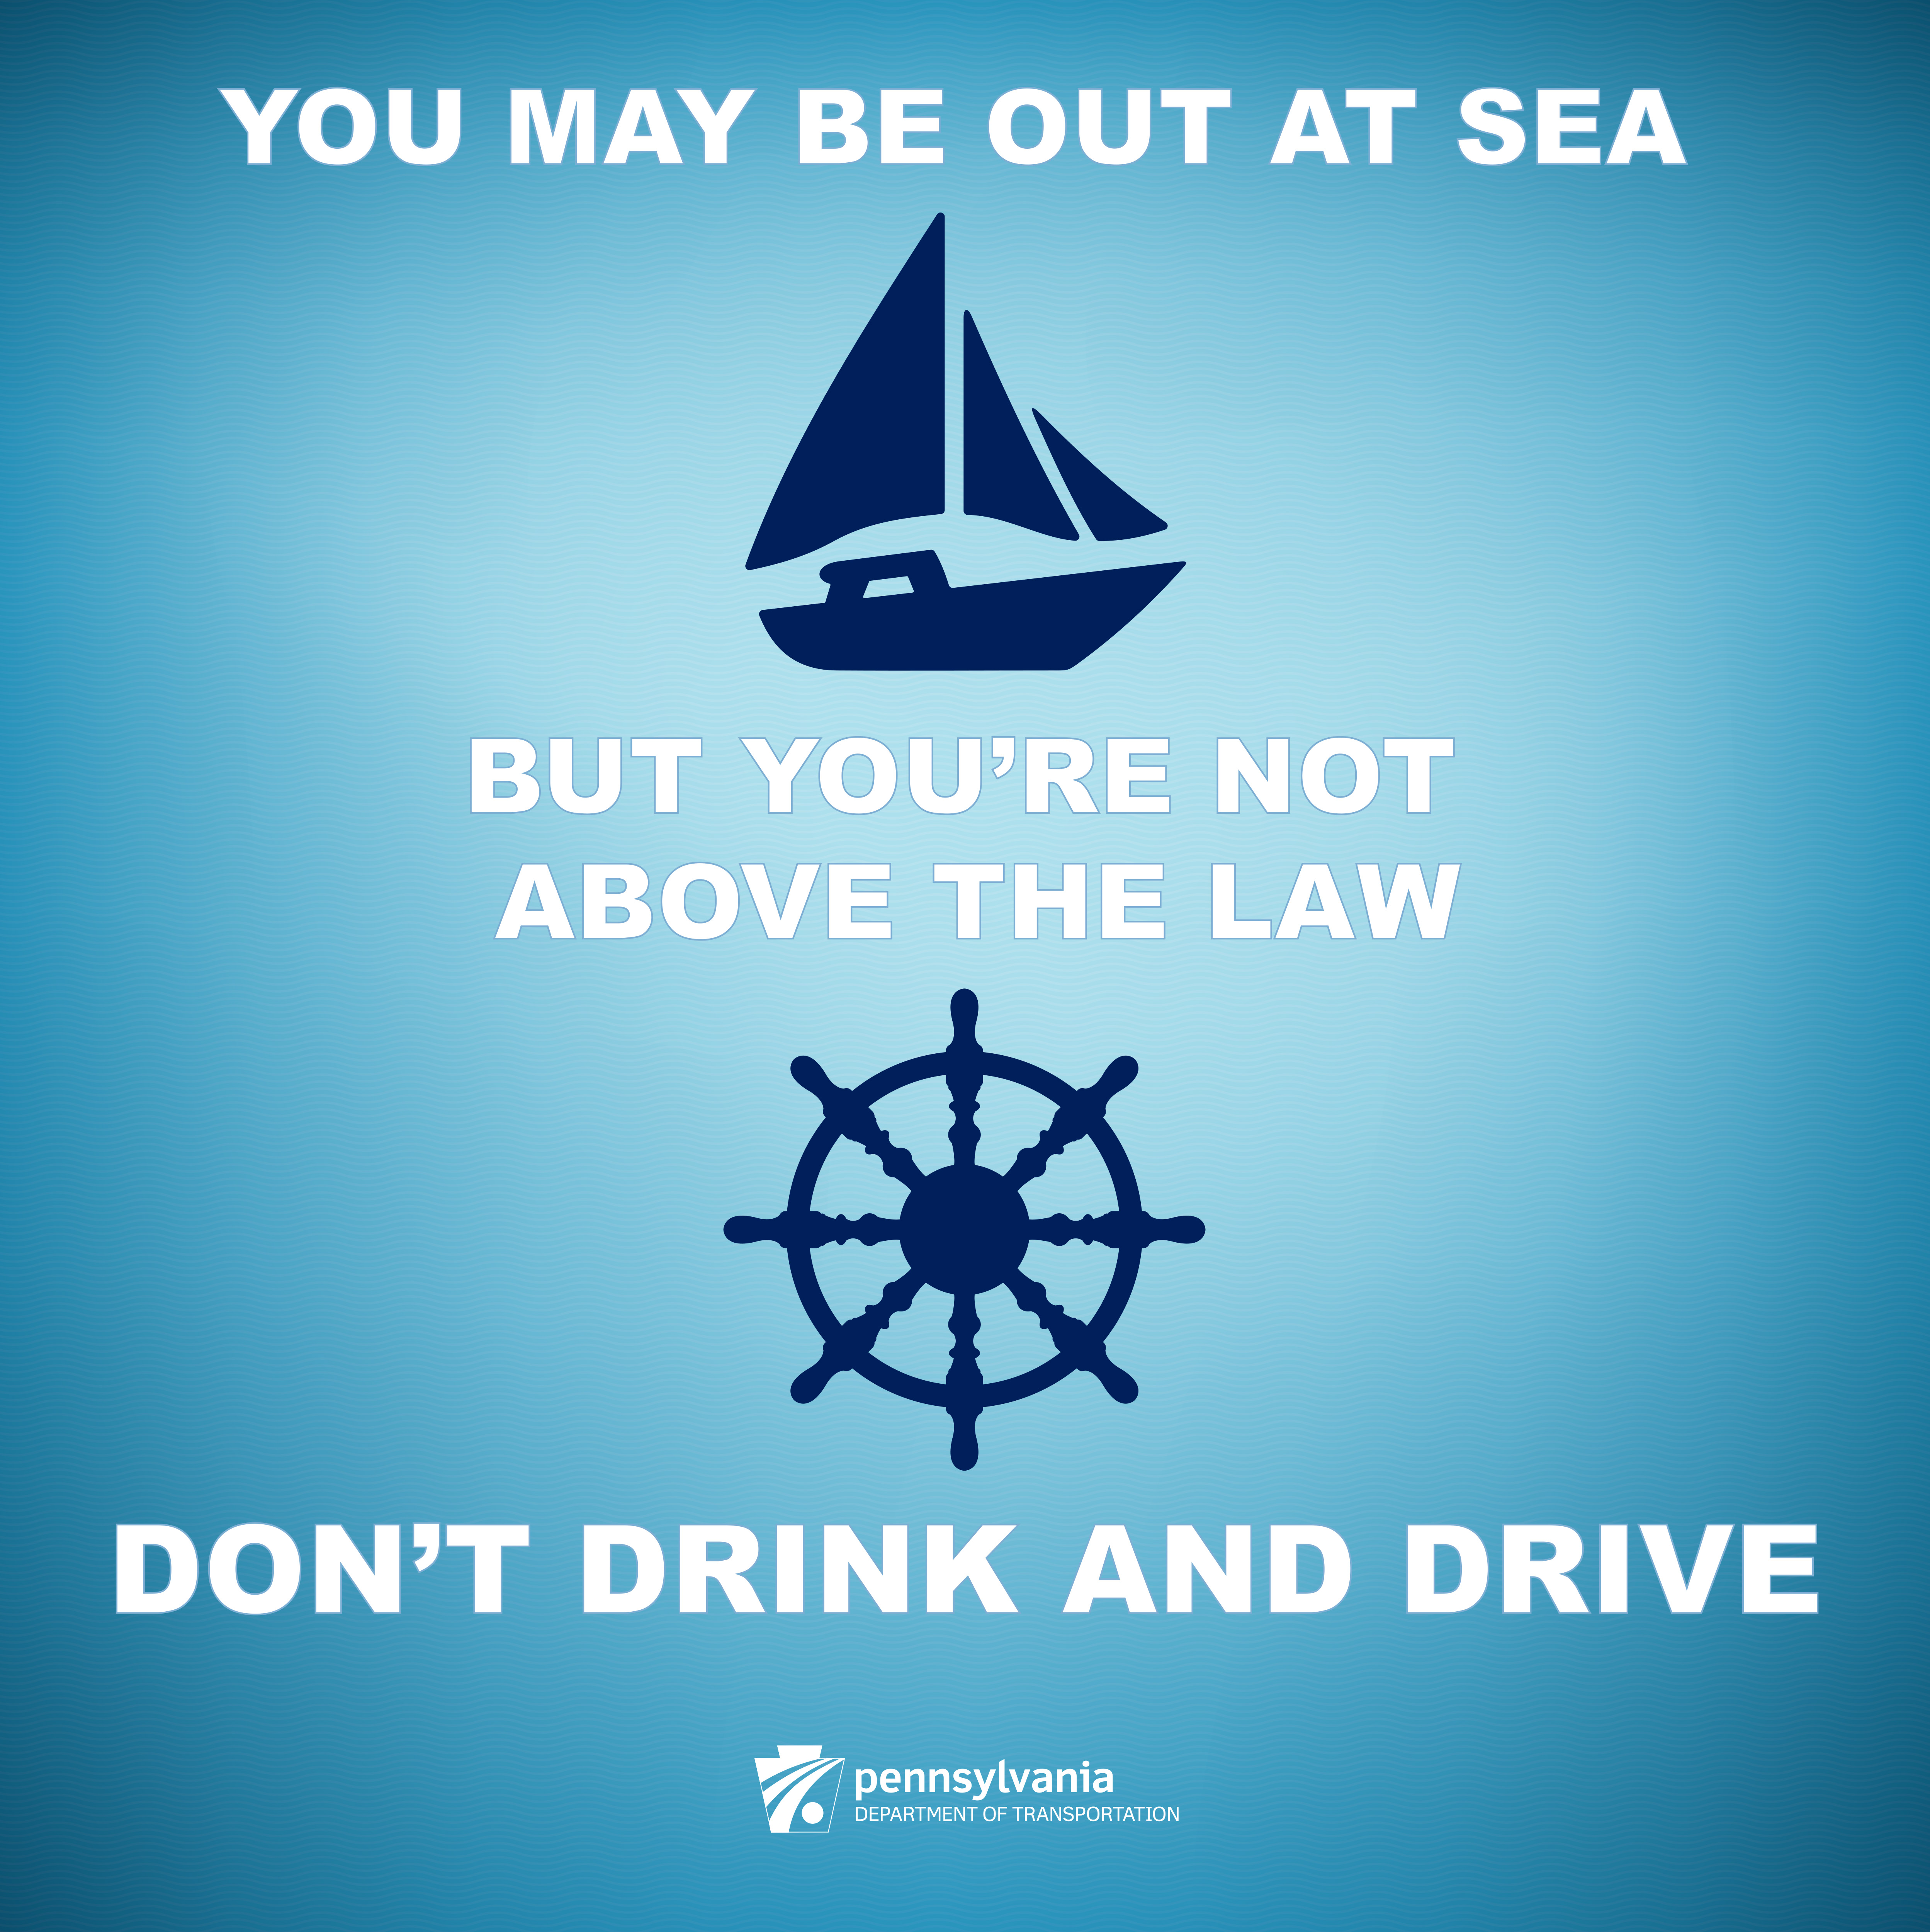 You may be out at sea, but you're not above the law. Don't drink and drive.